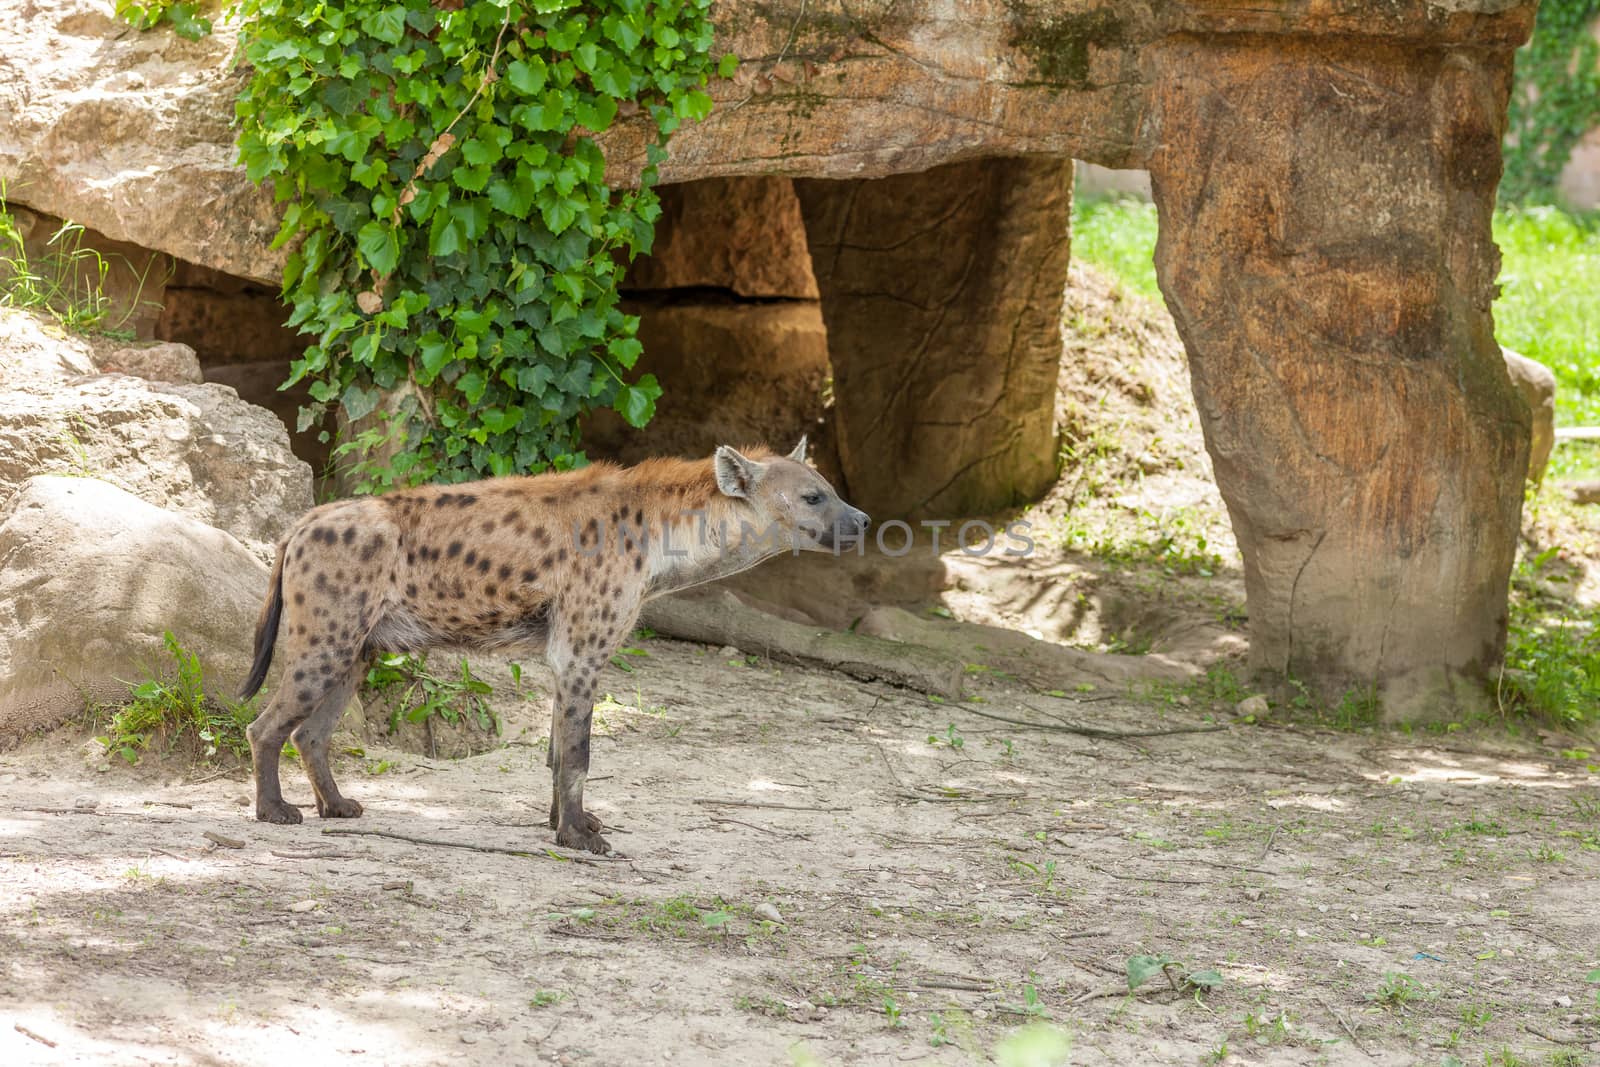 Hyena wandering in zoo by master1305